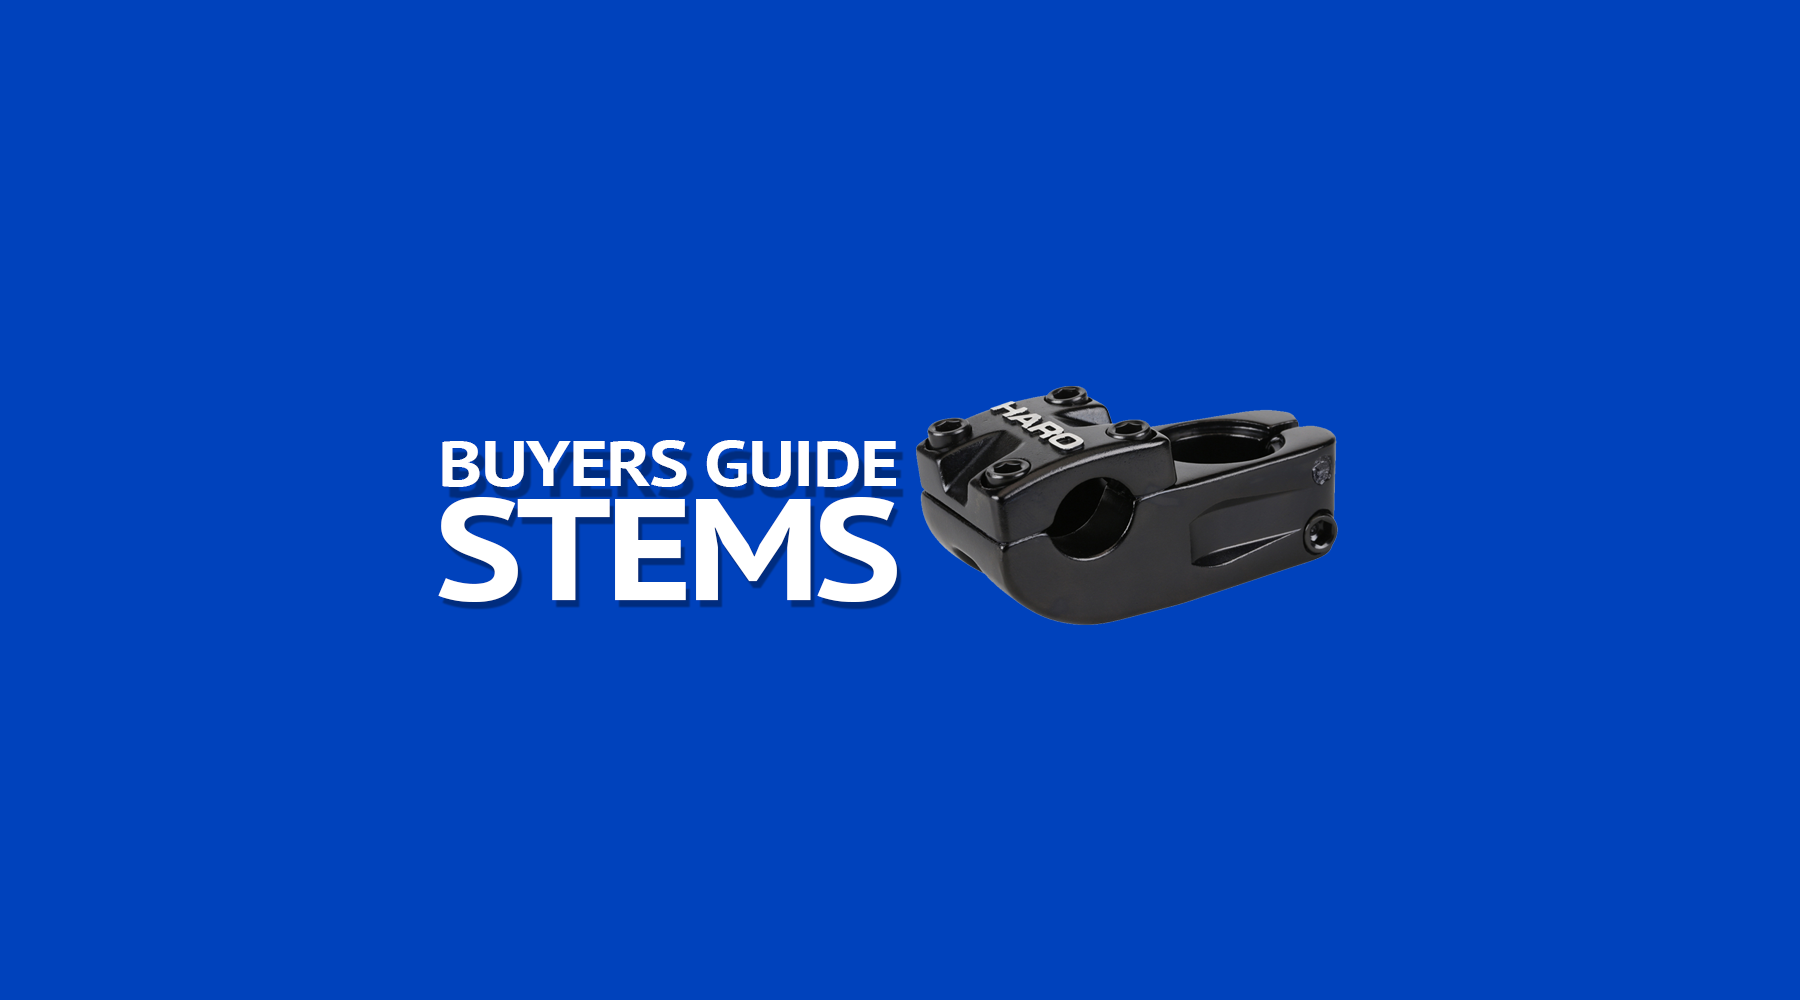 Buyers guide to bicycle stems